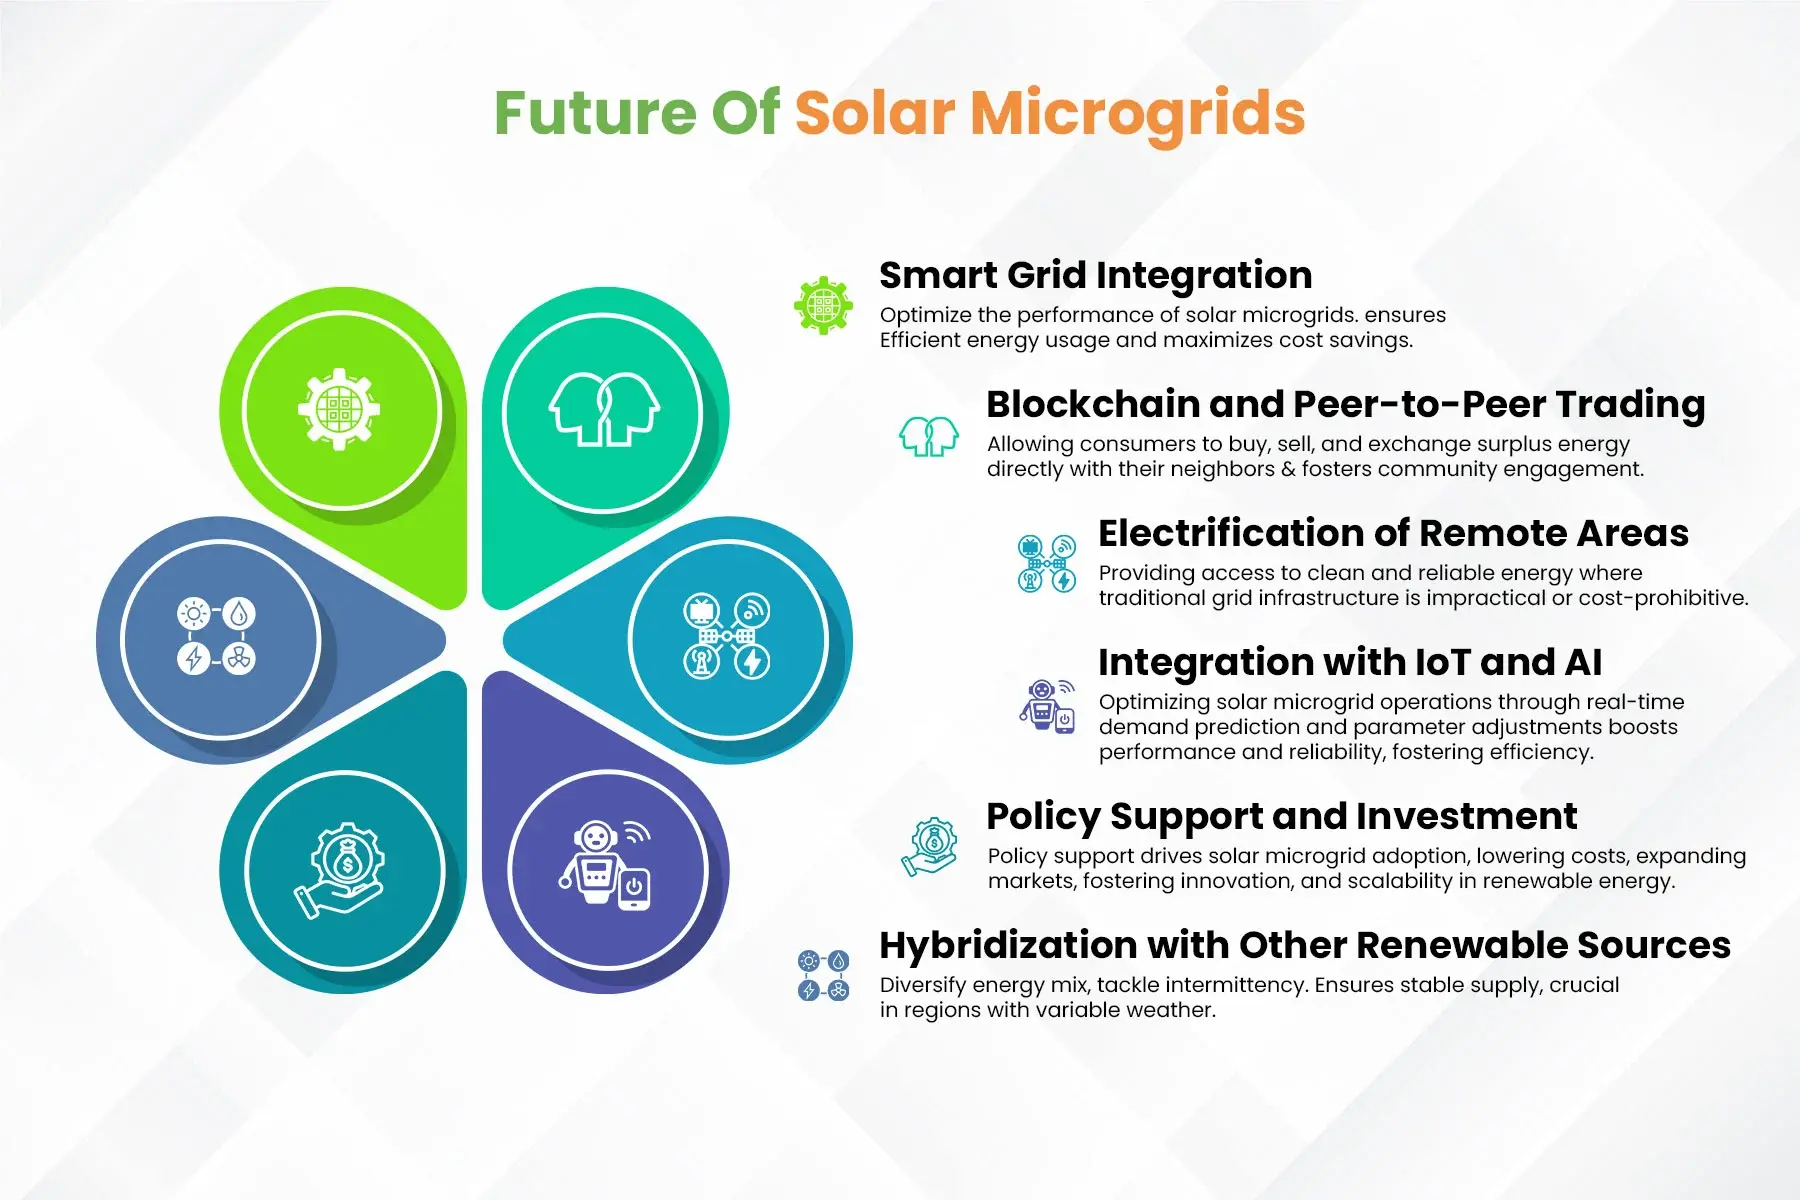 key points on the Future Of Solar Microgrids